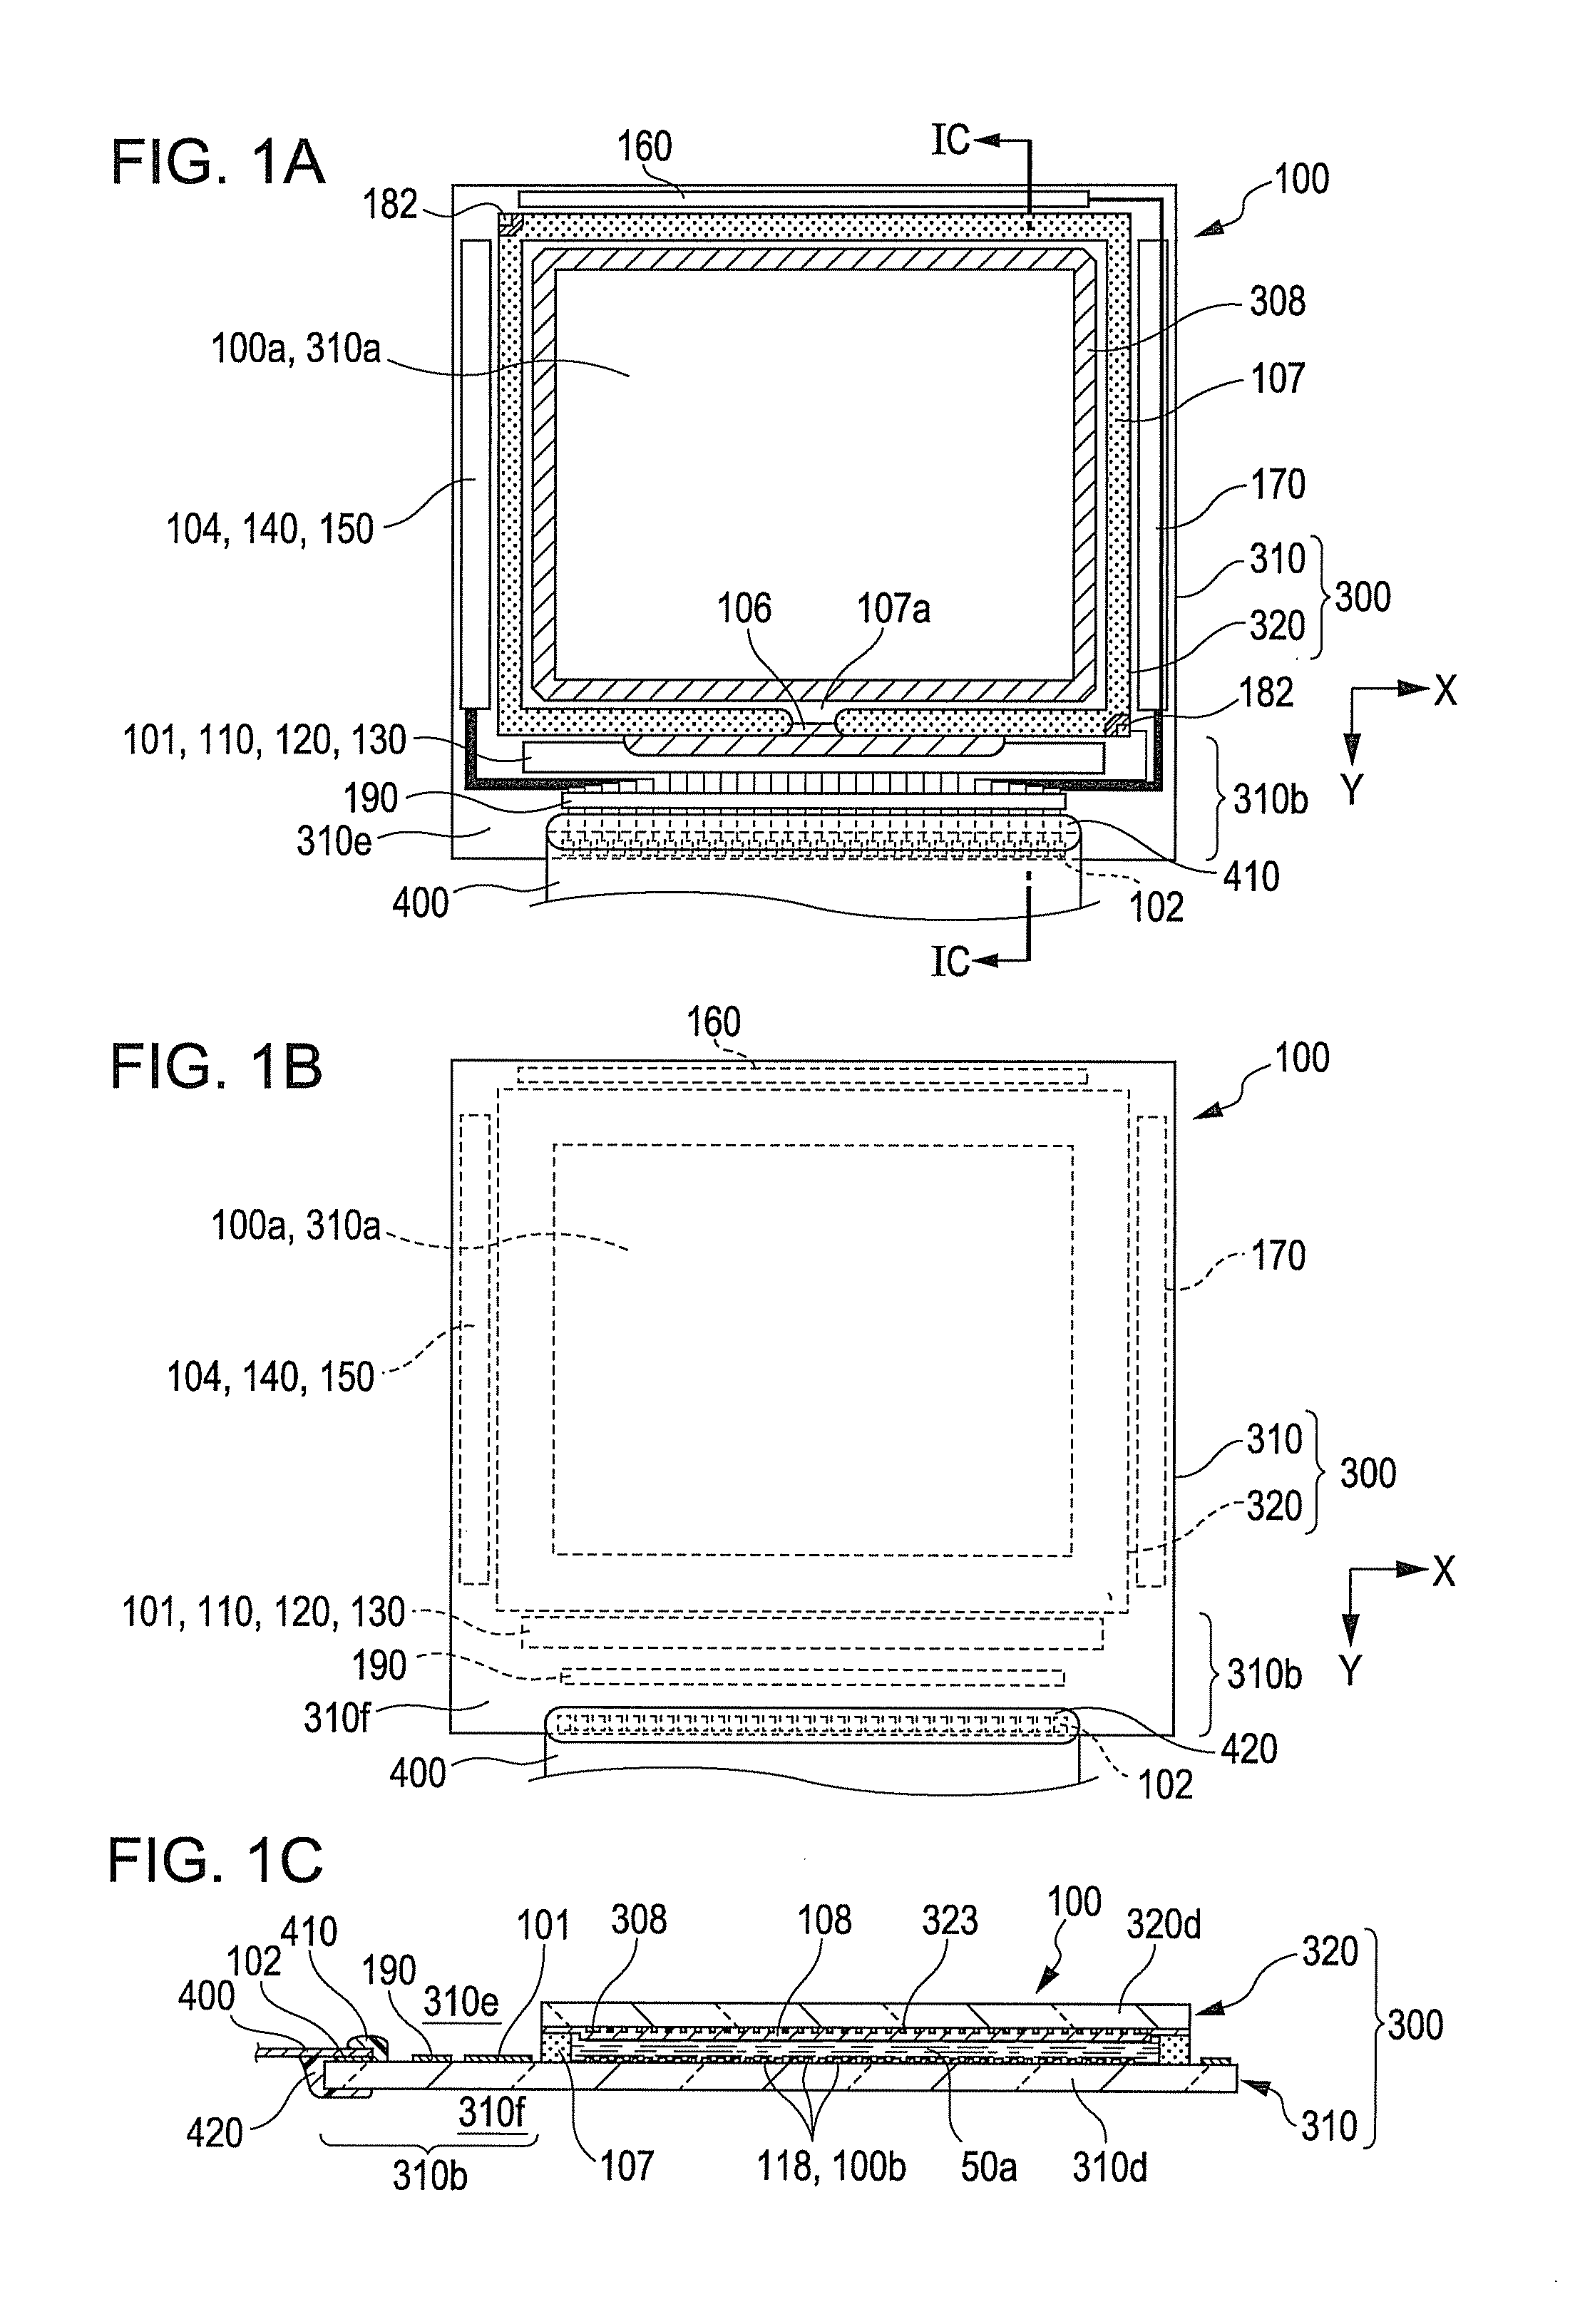 Method for manufacturing electro-optical device wherein an electrostatic protection circuit is shielded by a light-shielding sheet that is separate and apart from the electro-optical device